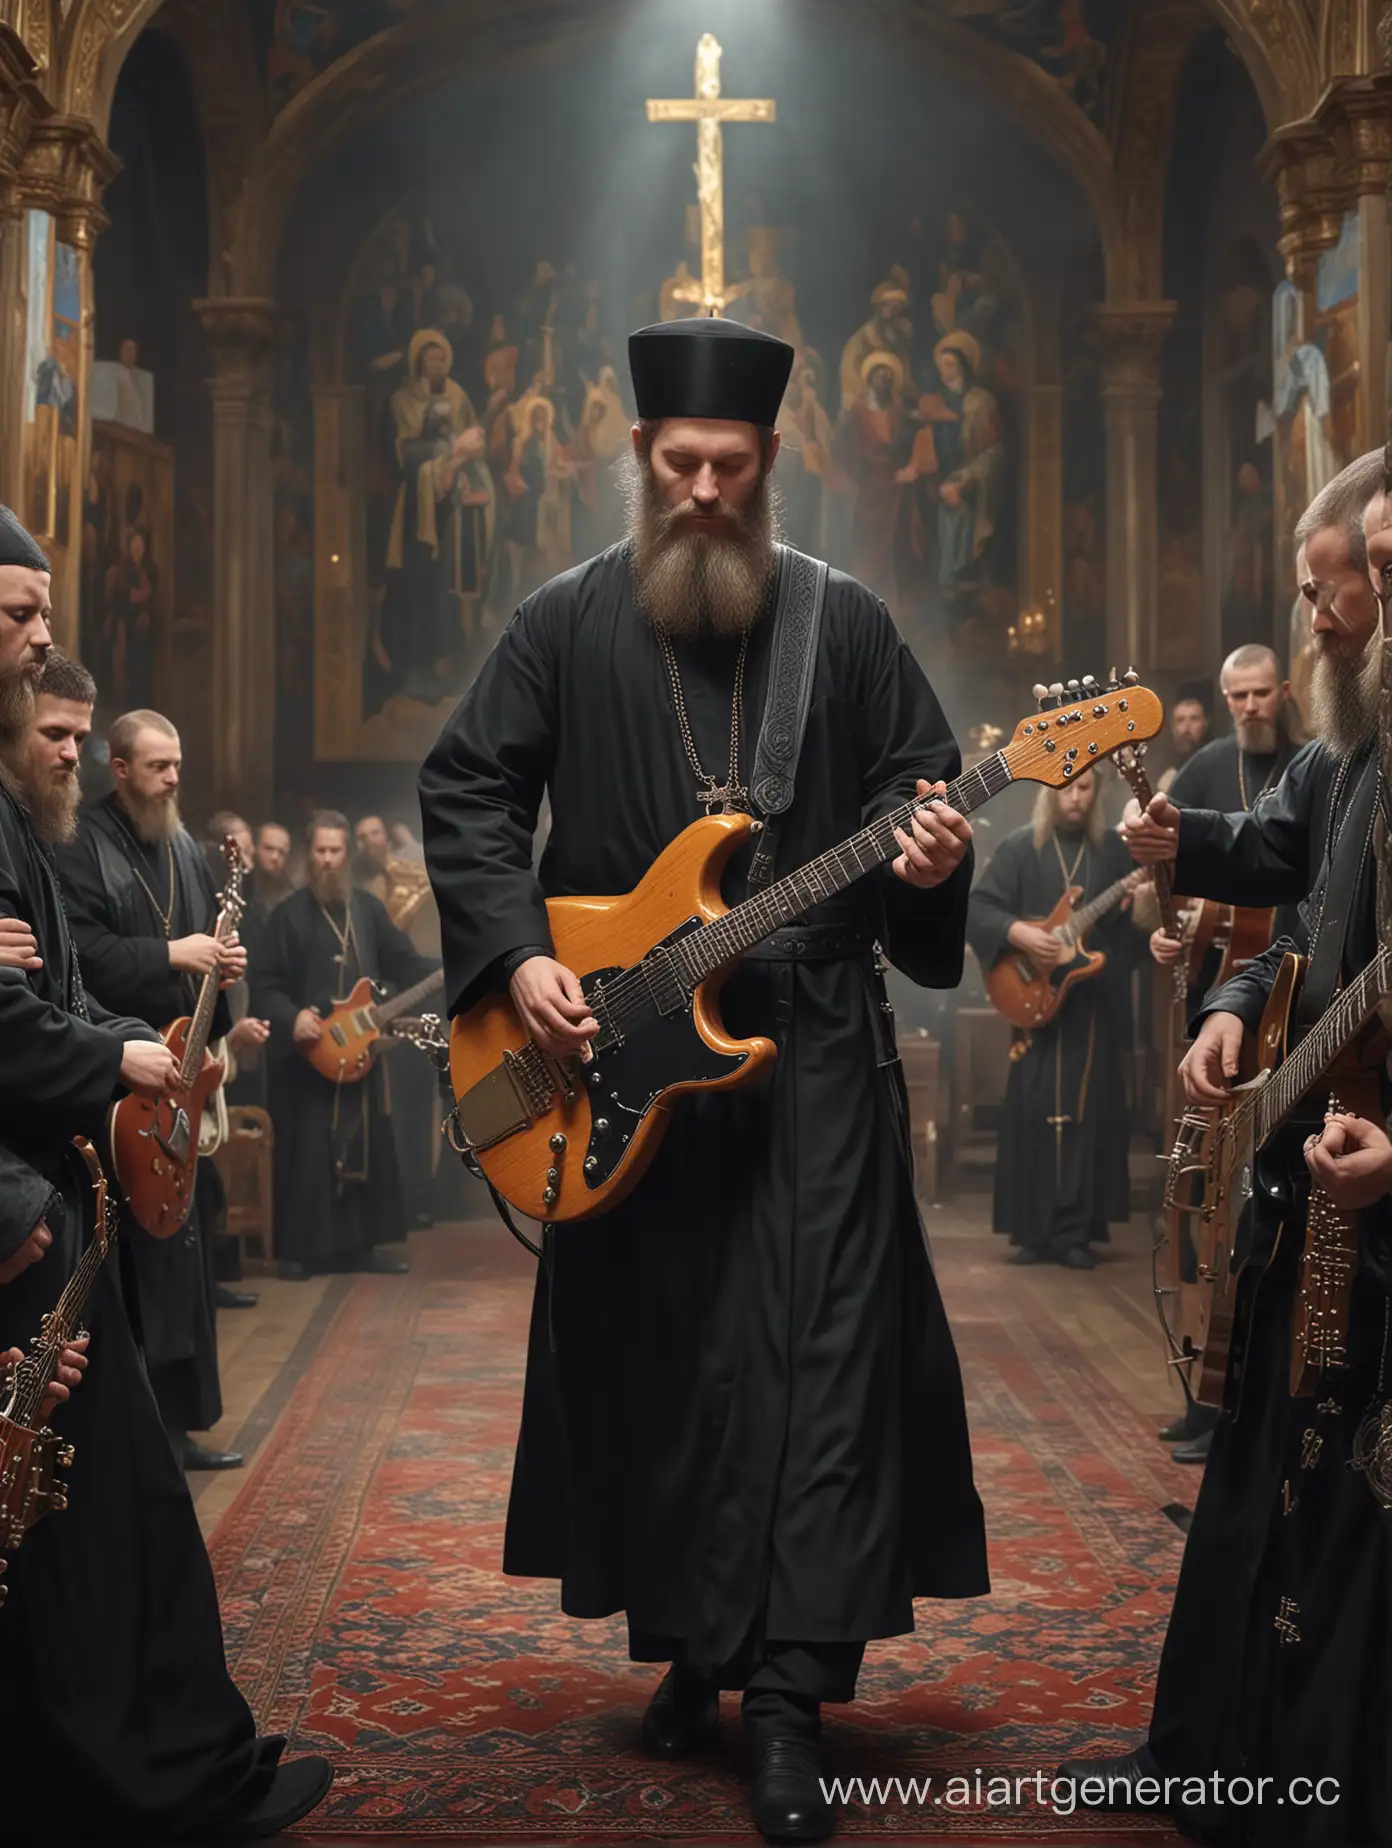 Russian-Orthodox-Monks-Rock-Concert-with-Electric-Guitar-in-Hand